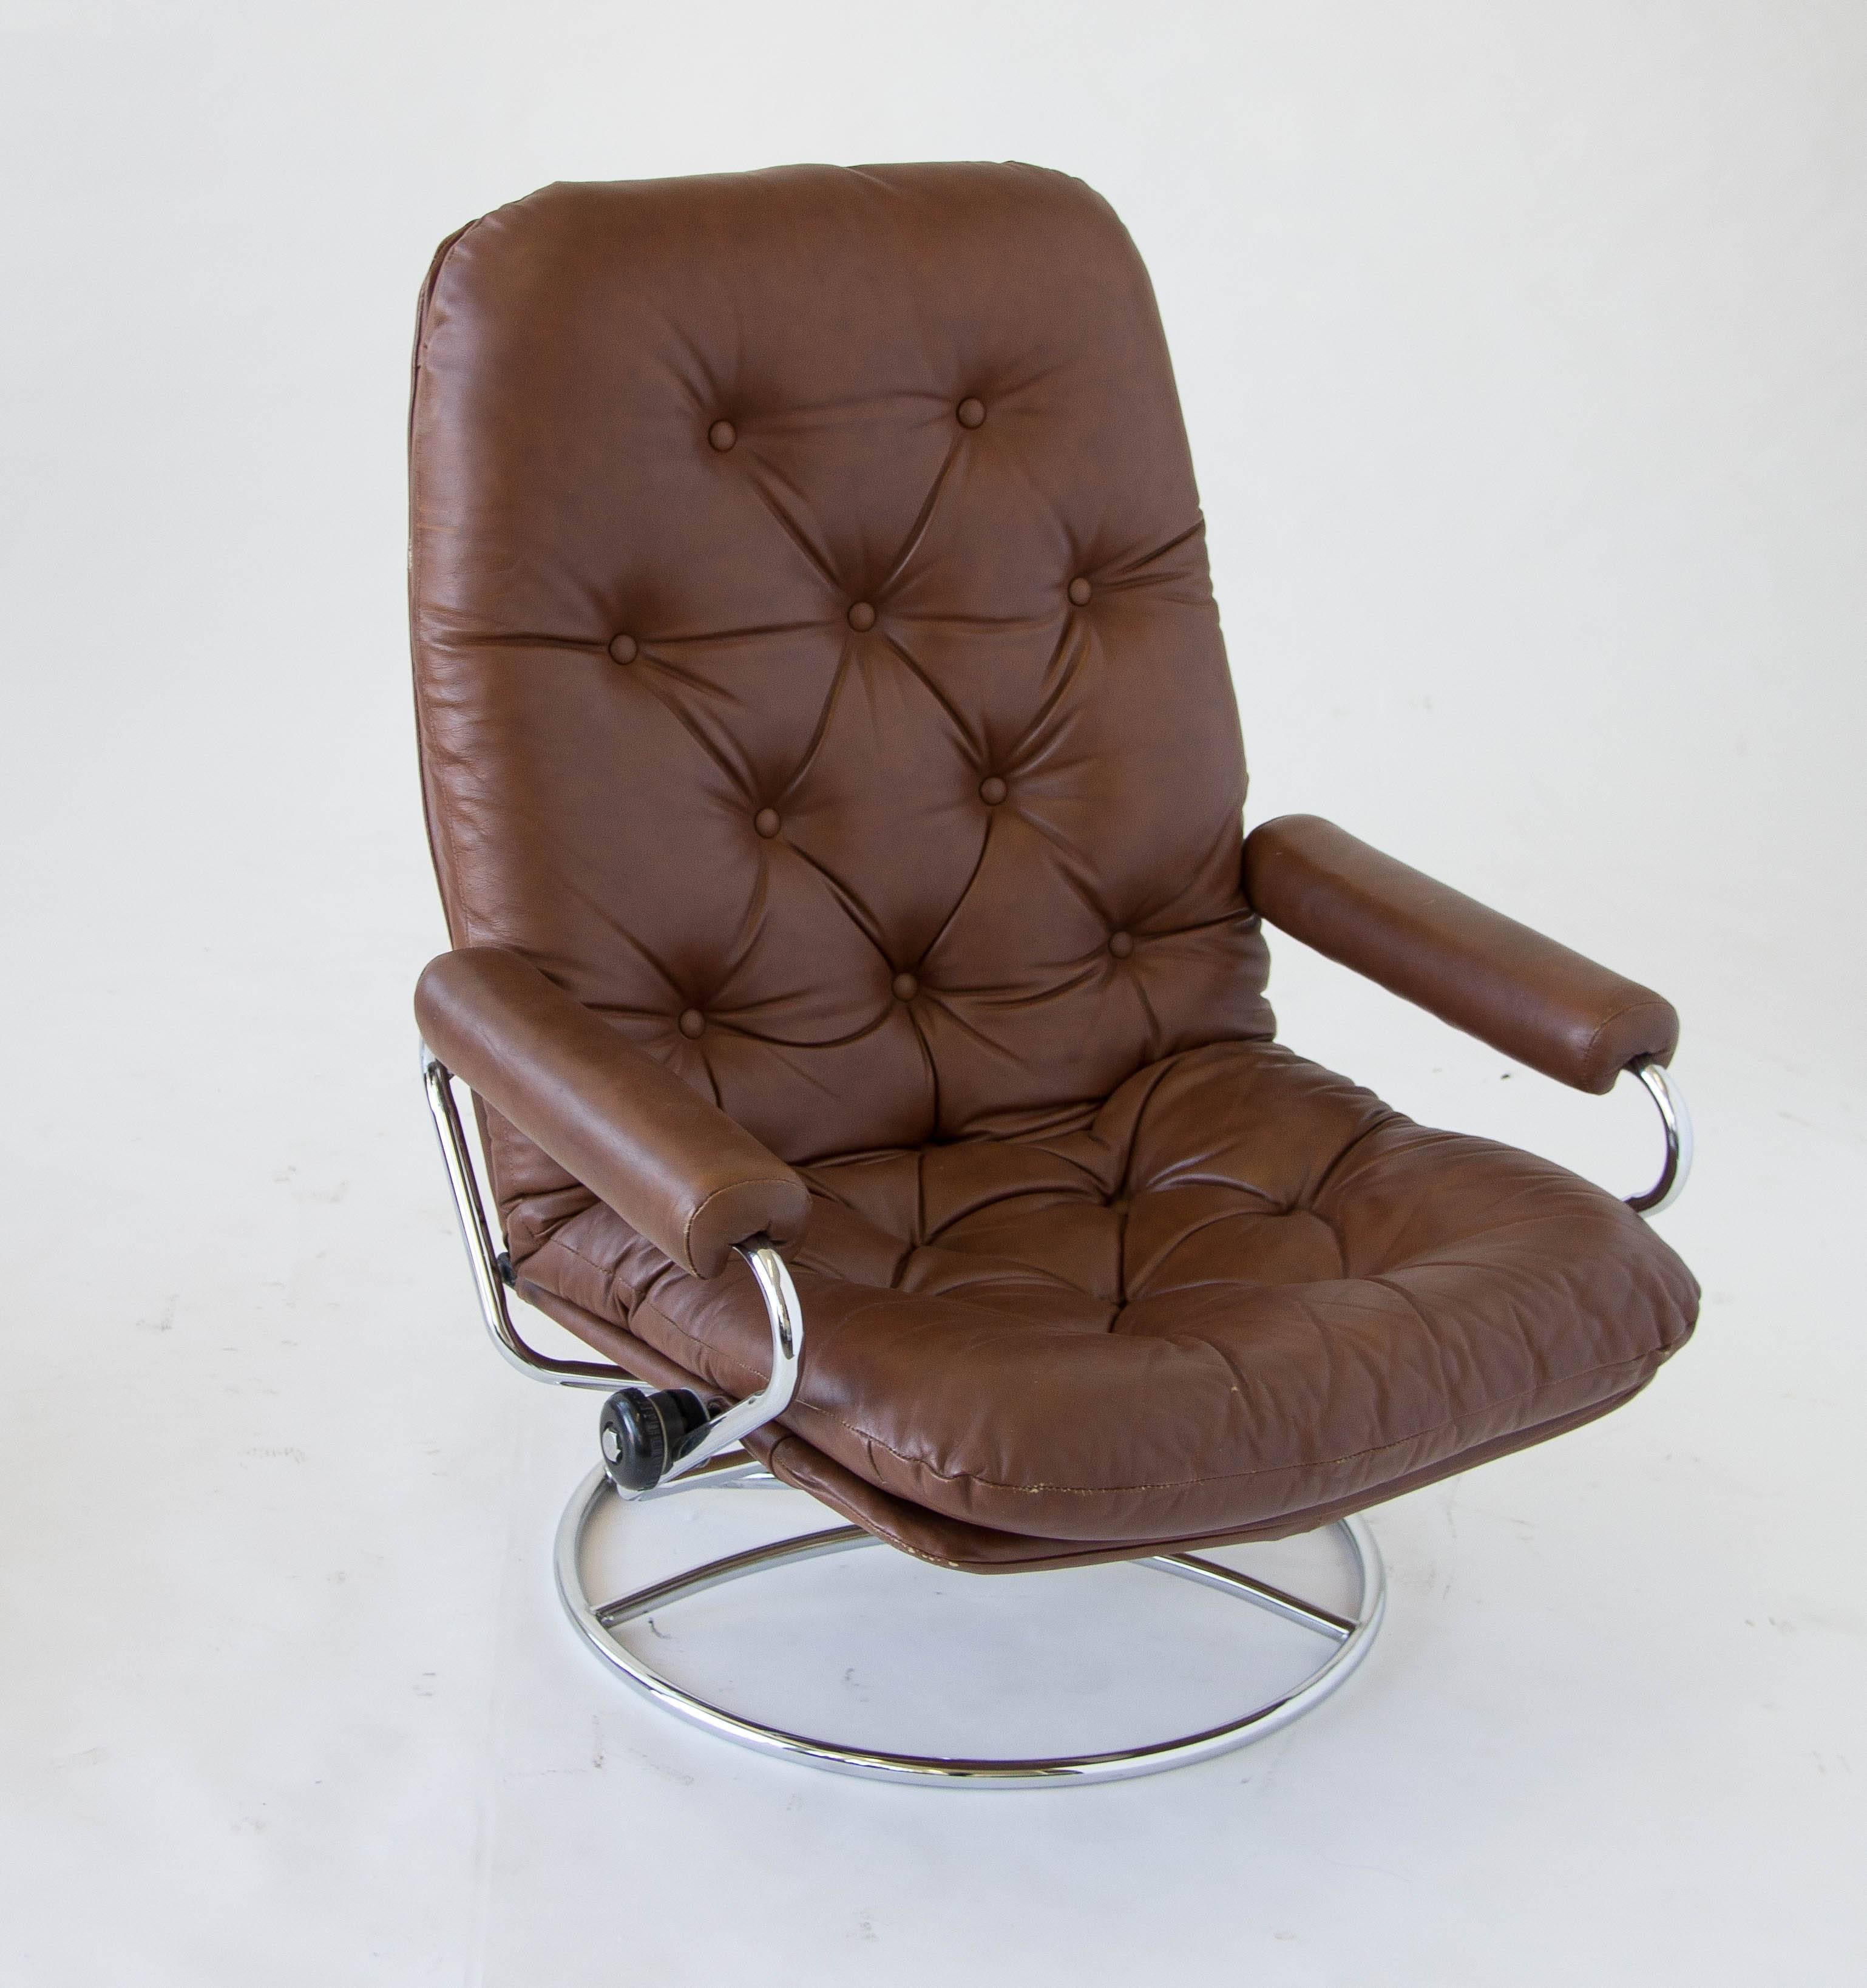 Norwegian made reclining lounge chair and ottoman designed in 1971. The chair has a high back with tufted upholstery in a rich mahogany leather (manufacturer’s tag refers to the color as “Pecan.”) An adjustable knob at each side of the arms controls